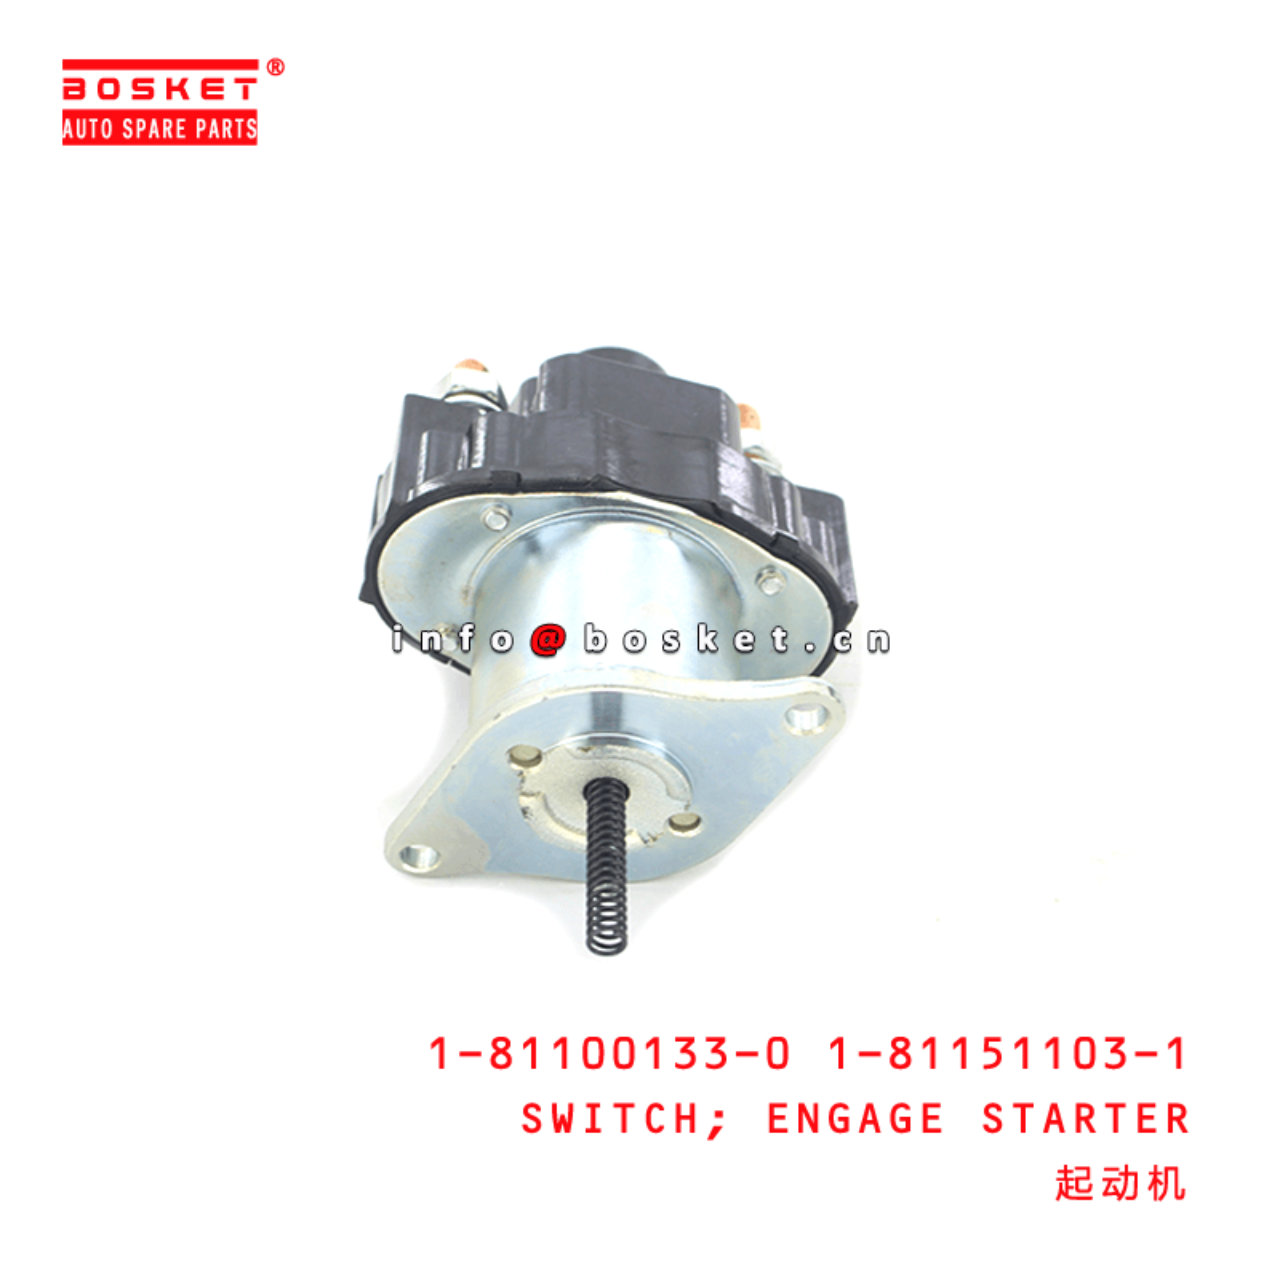 1-81100133-0 1-81151103-1 Engage Starter Switch 1811001330 1811511031 Suitable for ISUZU FVR34 6HK1